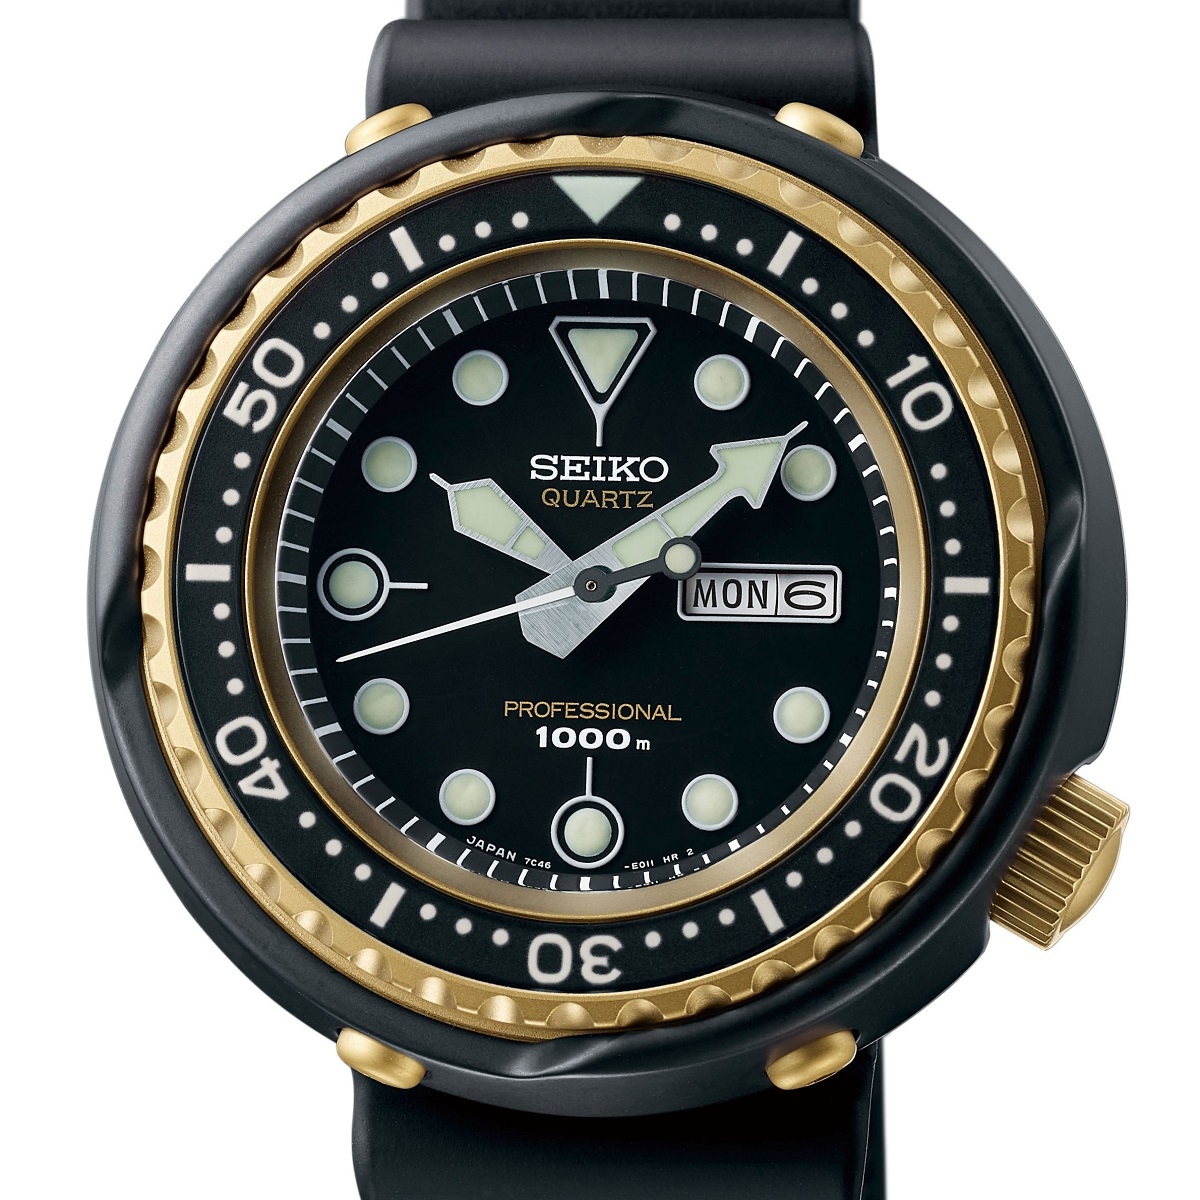 Seiko's newest Baselworld watches Seiko-Prospex-S23626-1000M-Limited-Edition-Dive-Watch-02